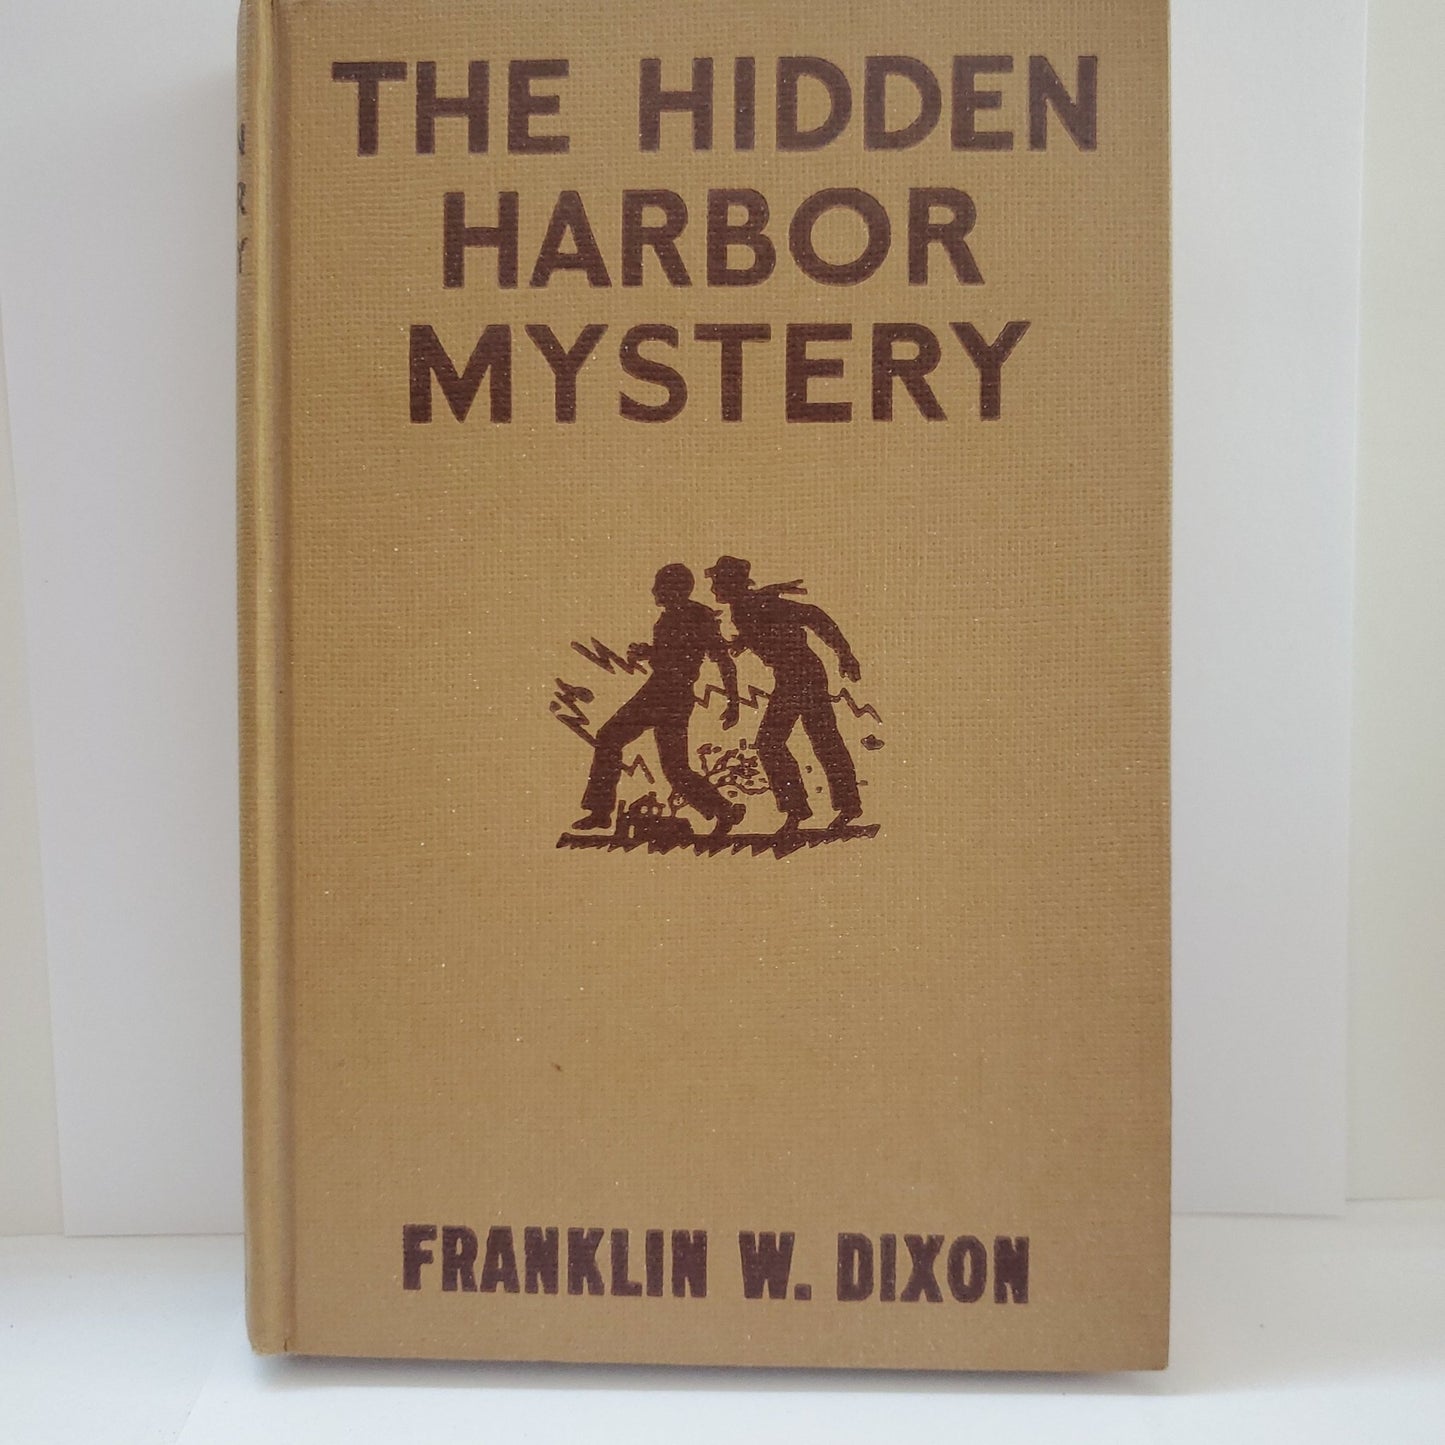 The Hidden Harbor Mystery - [ash-ling] Booksellers